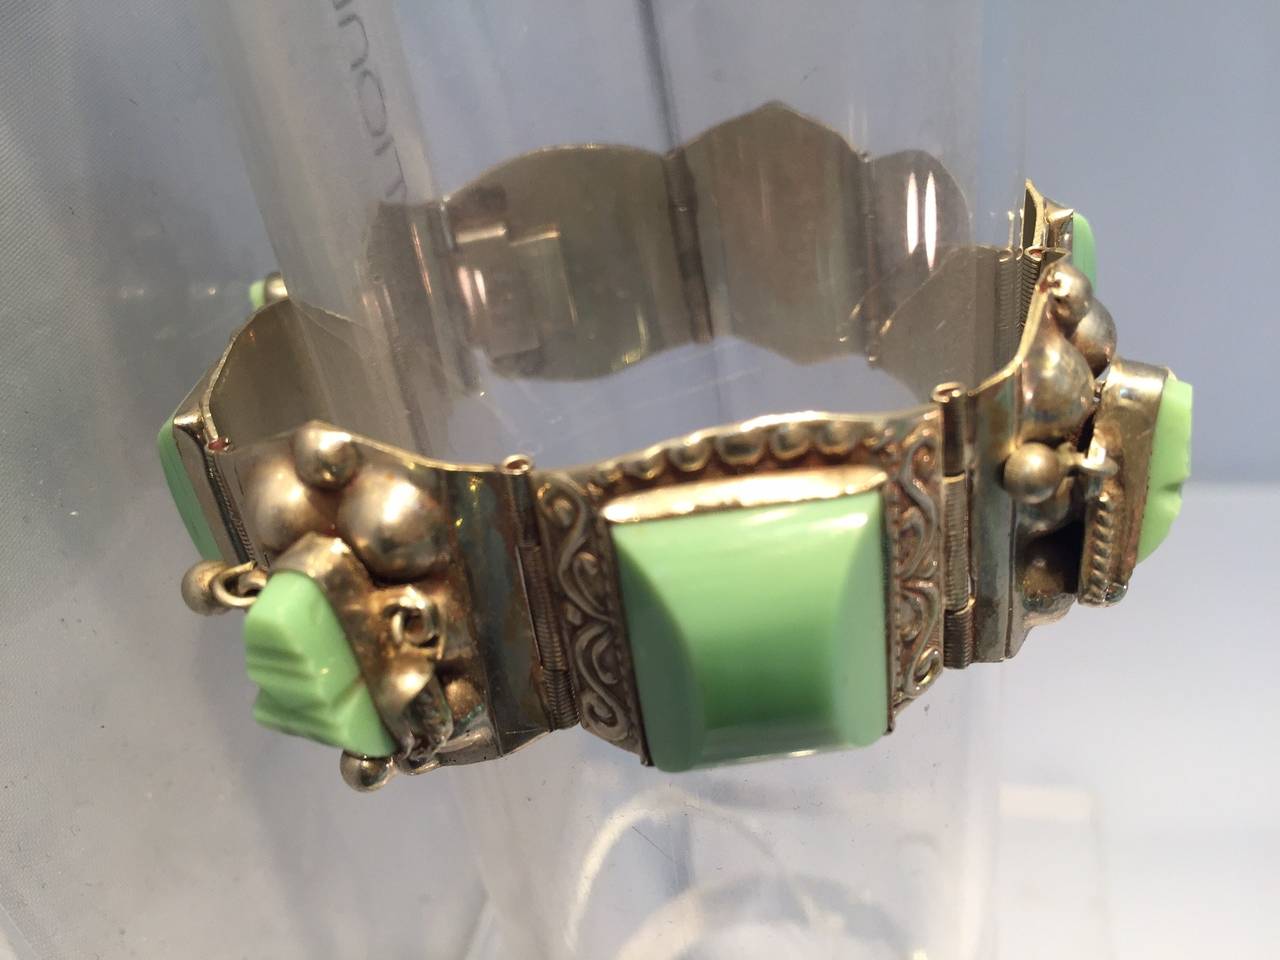 Artisan 1940s Carved Jadeite Glass and Sterling Silver Bracelet from Mexico